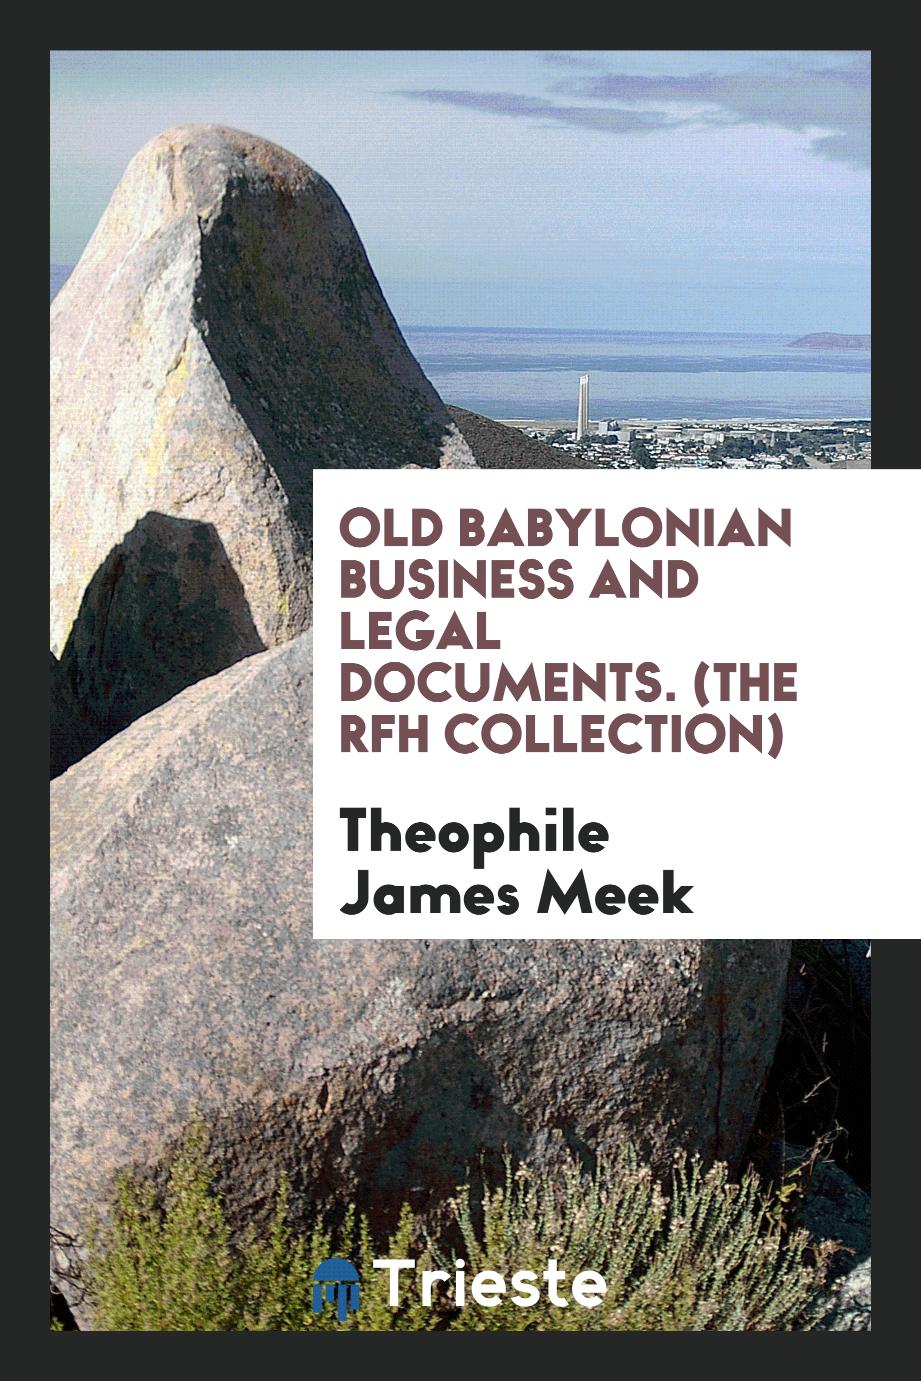 Old Babylonian Business and Legal Documents. (The RFH Collection)